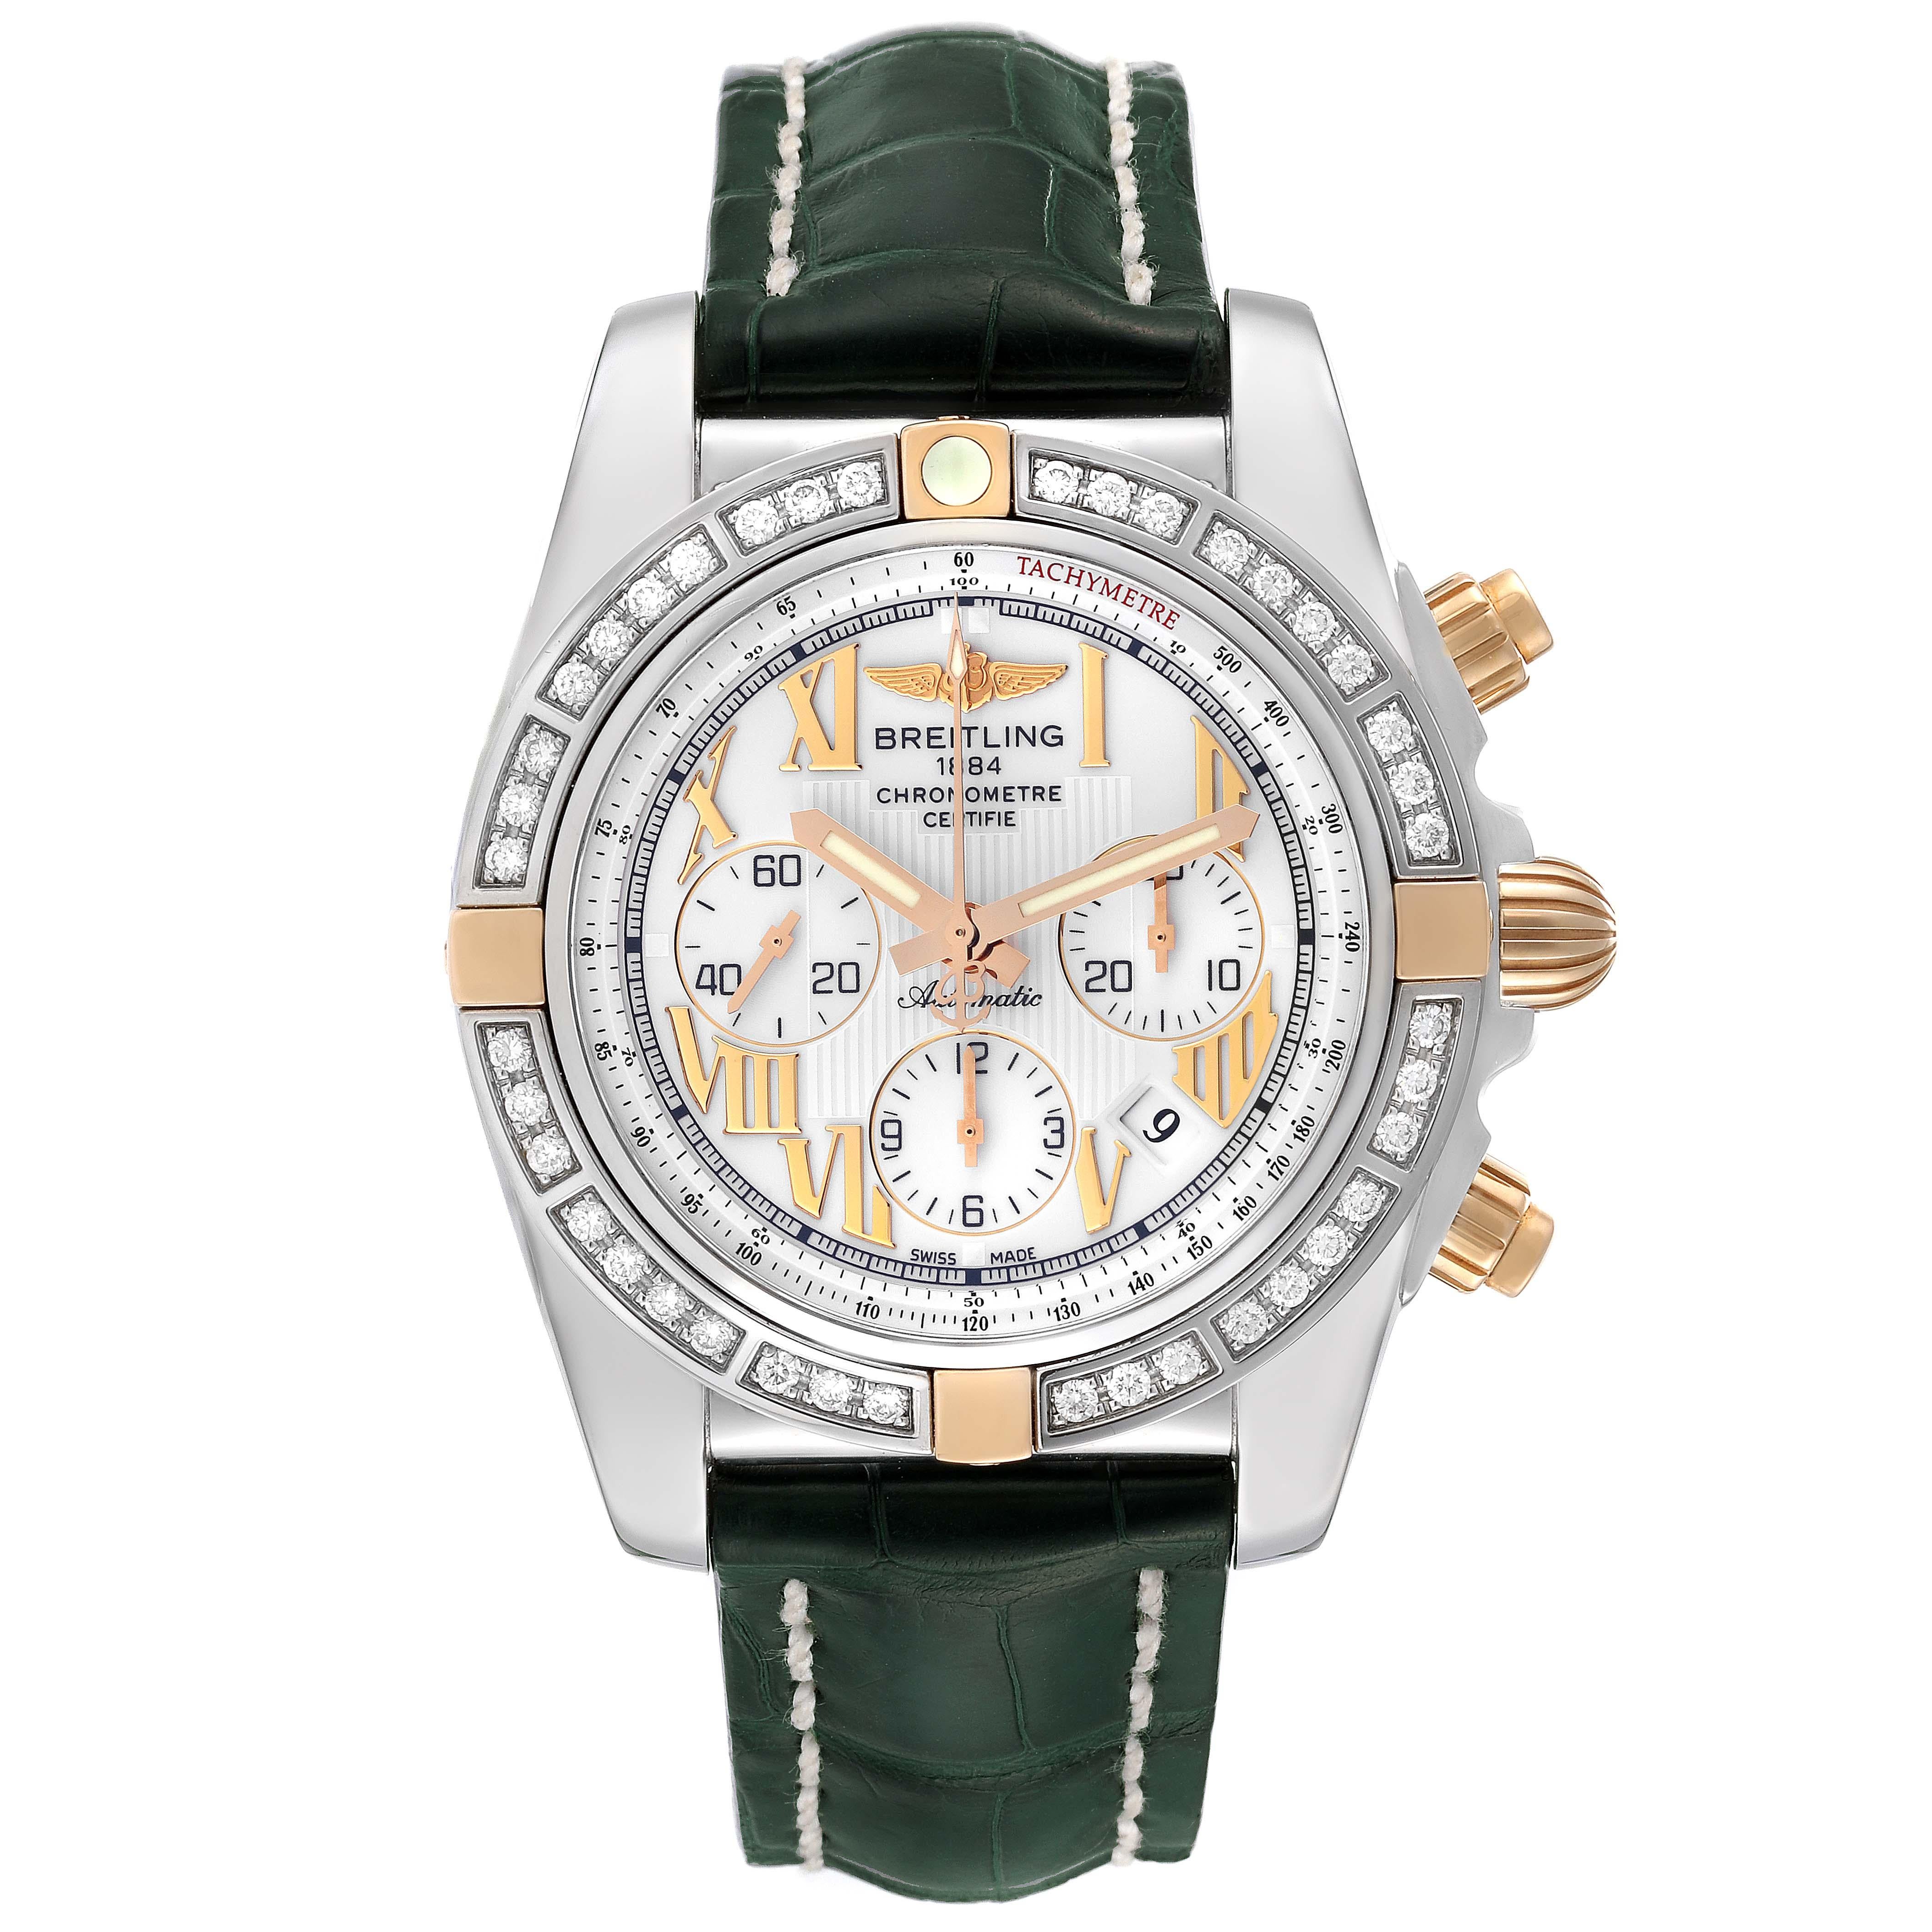 Breitling Chronomat White Dial Steel Rose Gold Diamond Mens Watch IB0110. Self-winding automatic officially certified chronometer movement. Chronograph function. Stainless steel and 18k rose gold case 43.5 mm in diameter with screwed down crown and